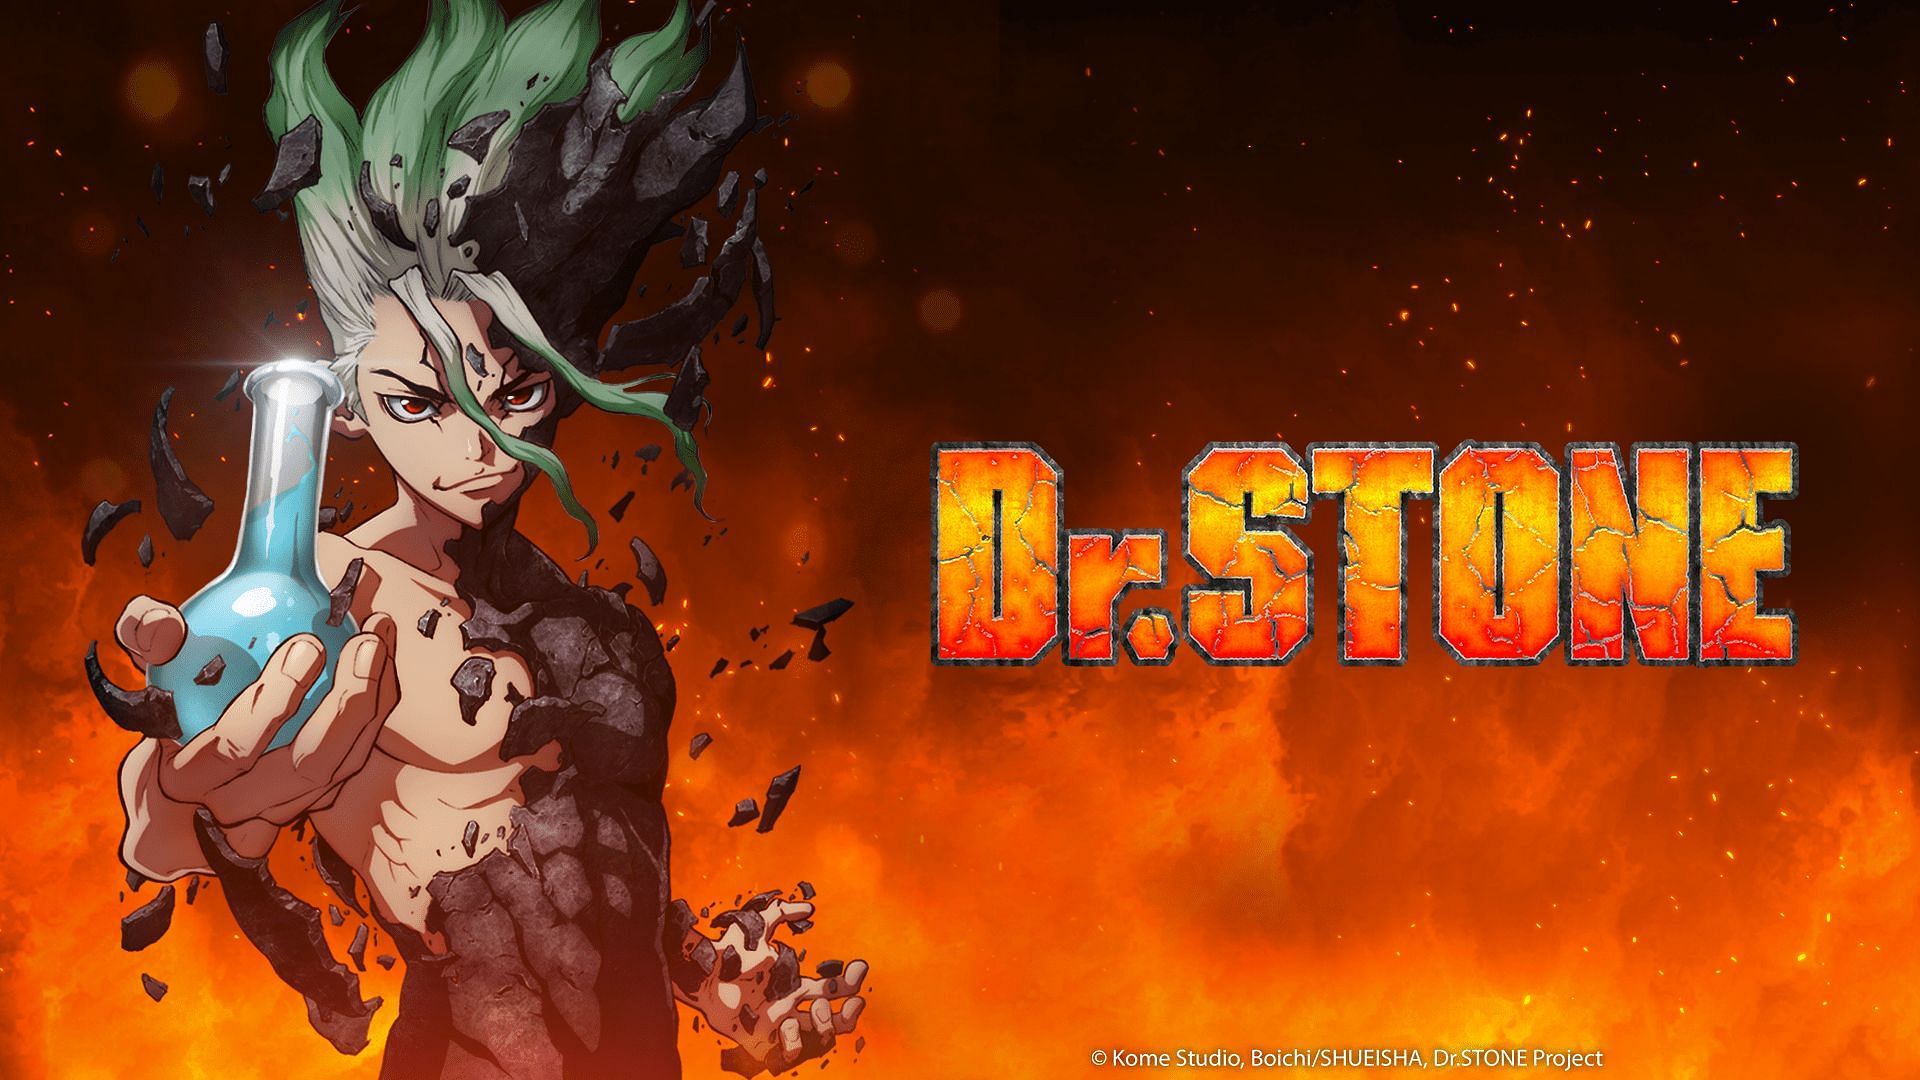 Dr. Stone season 1 set to premiere in Hindi, Tamil, and Telugu (Image via A-1 Pictures)